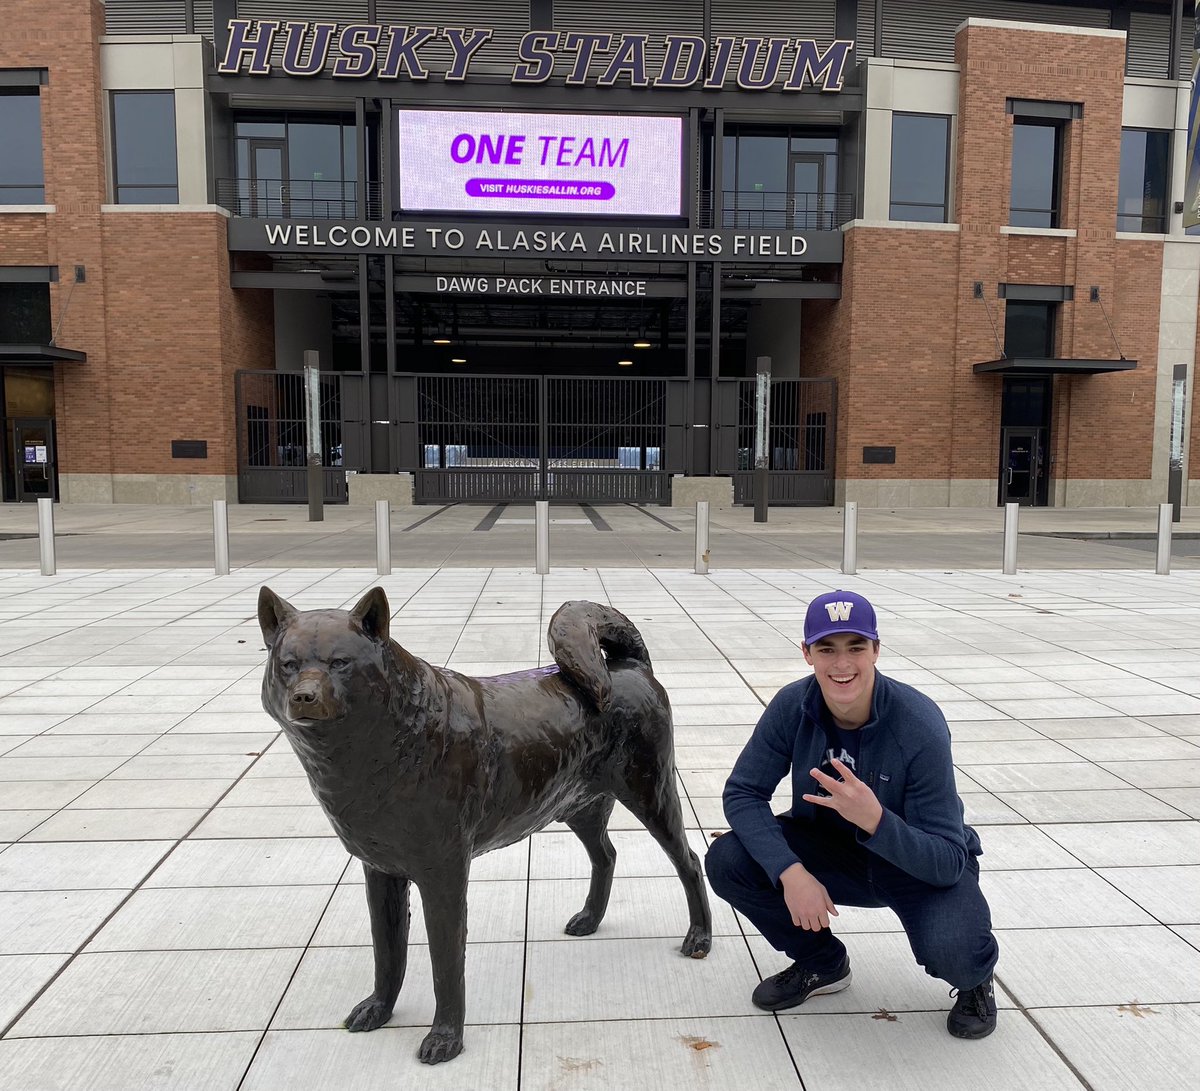 After a great trip to Seattle and walking the campus, I’m psyched to announce my commitment to the University of Washington!!! This has been an incredible journey, thank you to everyone who has made this possible! @CoachCato1 @CoachLakeUDUB @UW @UW_Football @bcpfootball